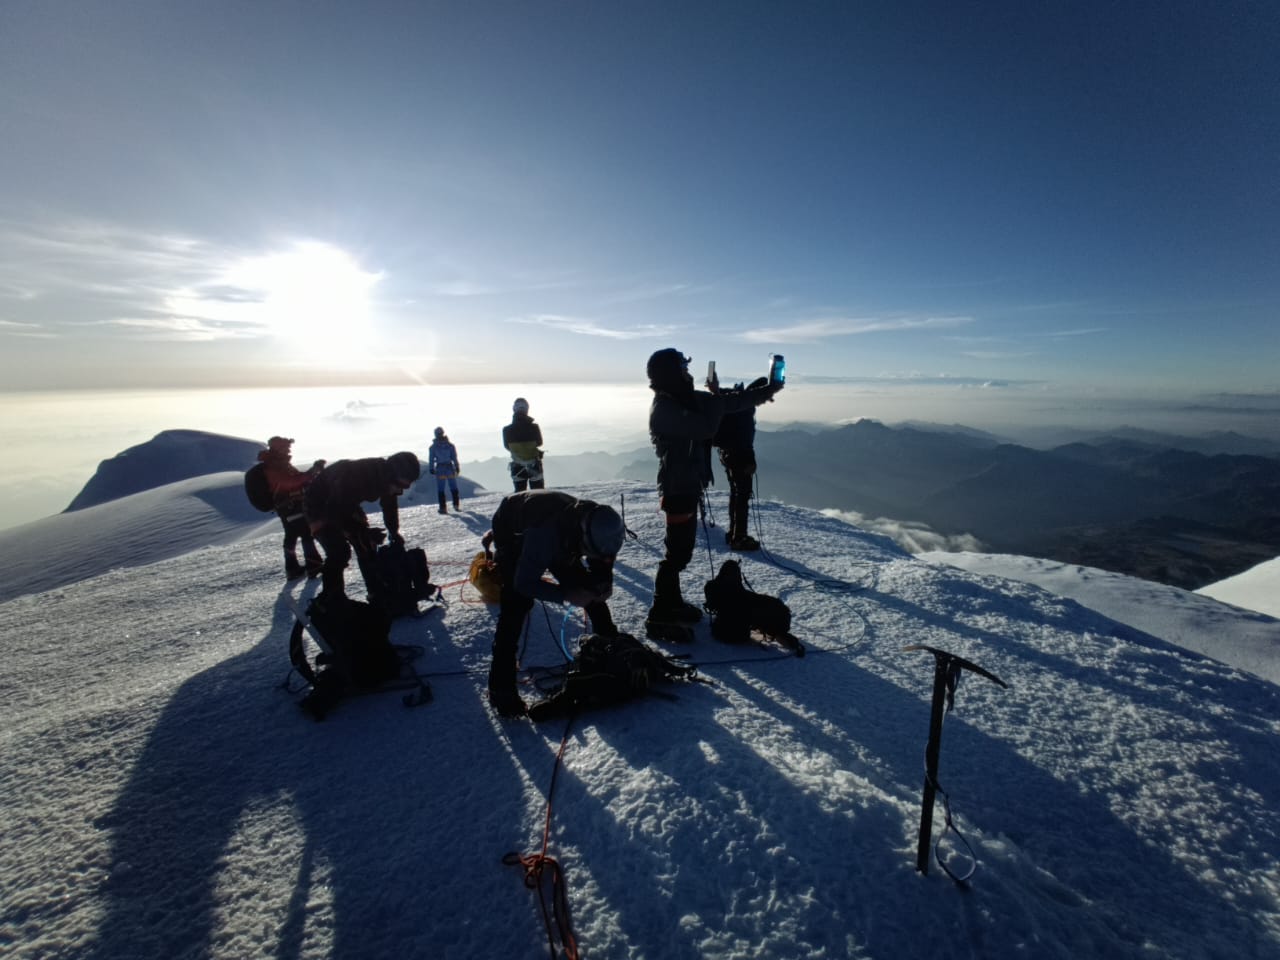 On the summit of Cayambe